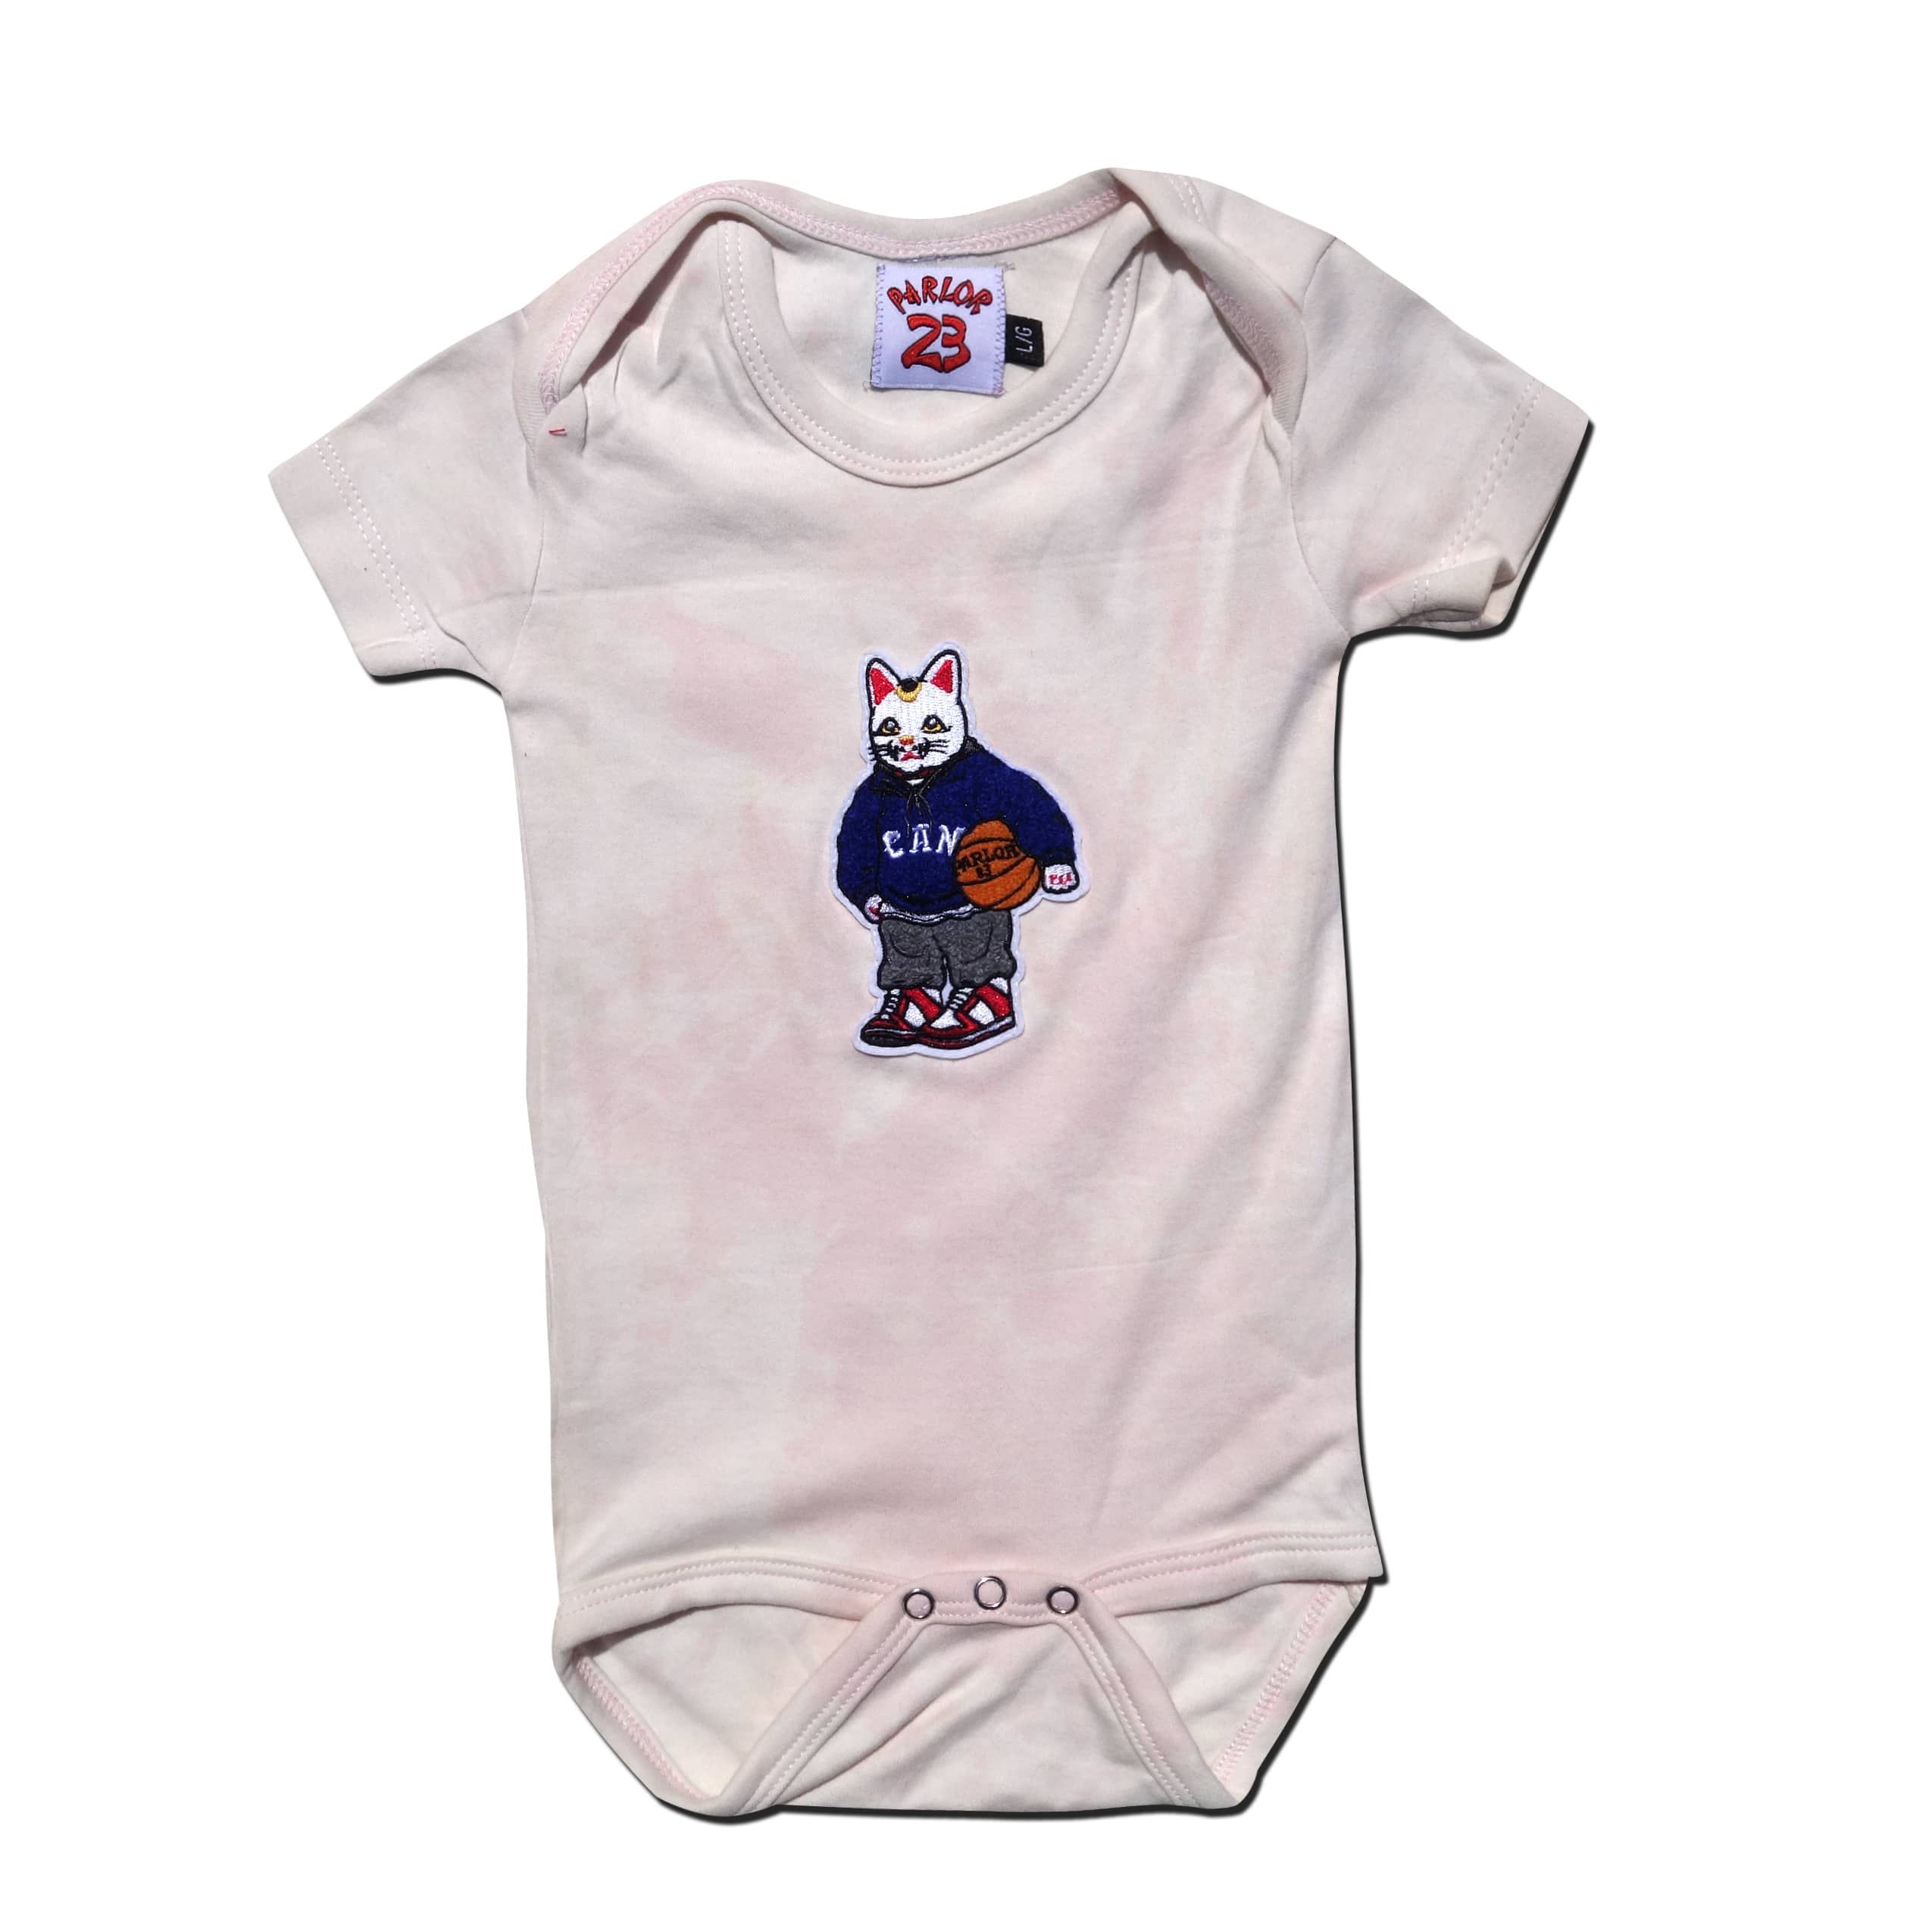 Parlor 23 Dyed Chenille Infant "PRLR Sport" Onesie